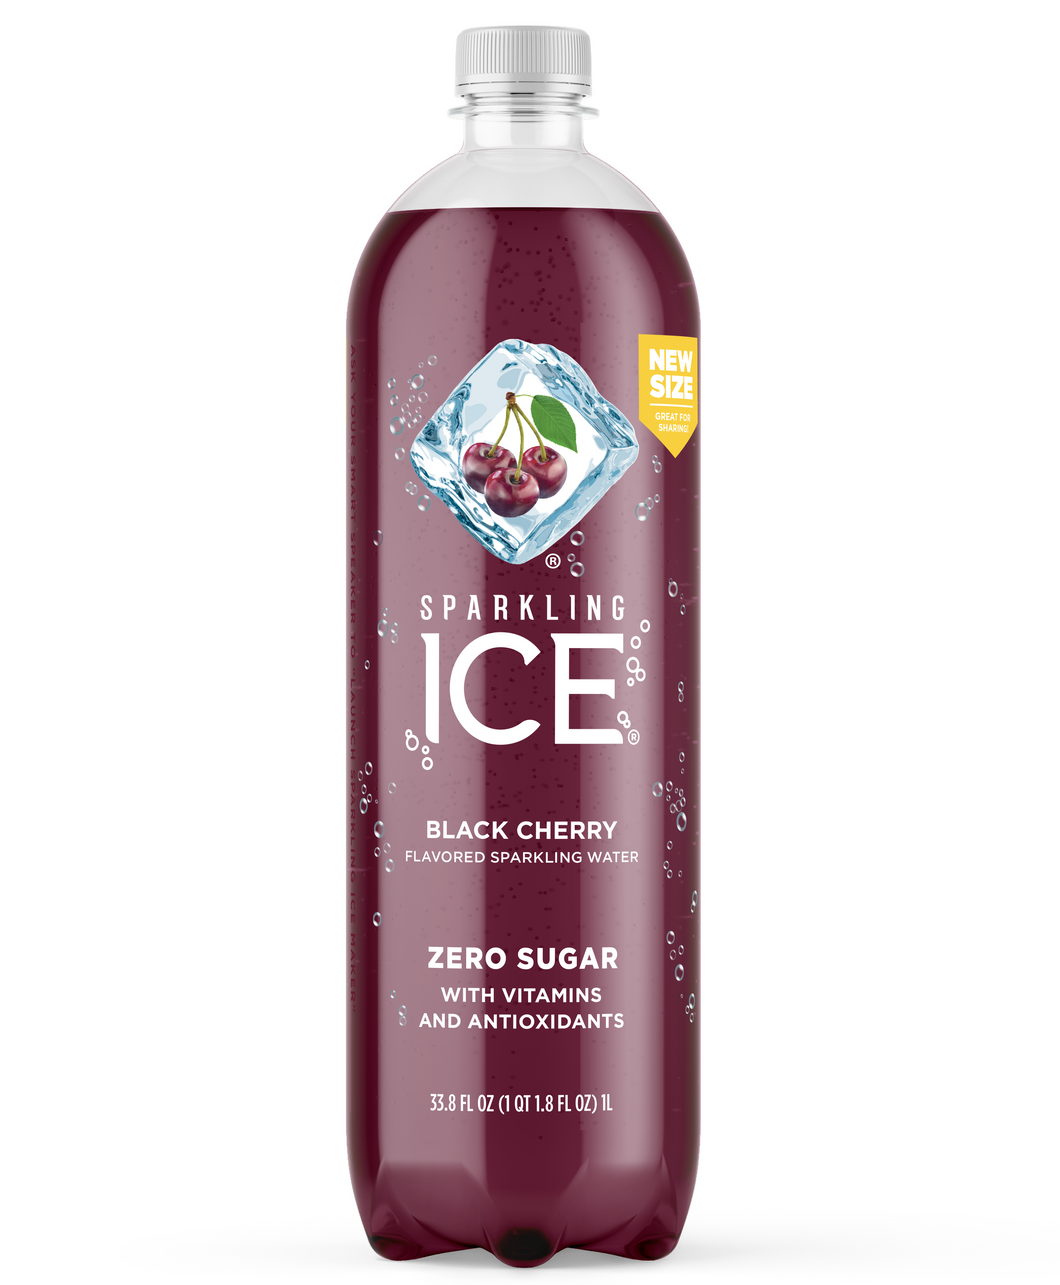 Sparkling Ice Flavored Sparkling Water, Black Cherry, 1 Liter (Pack of 12)